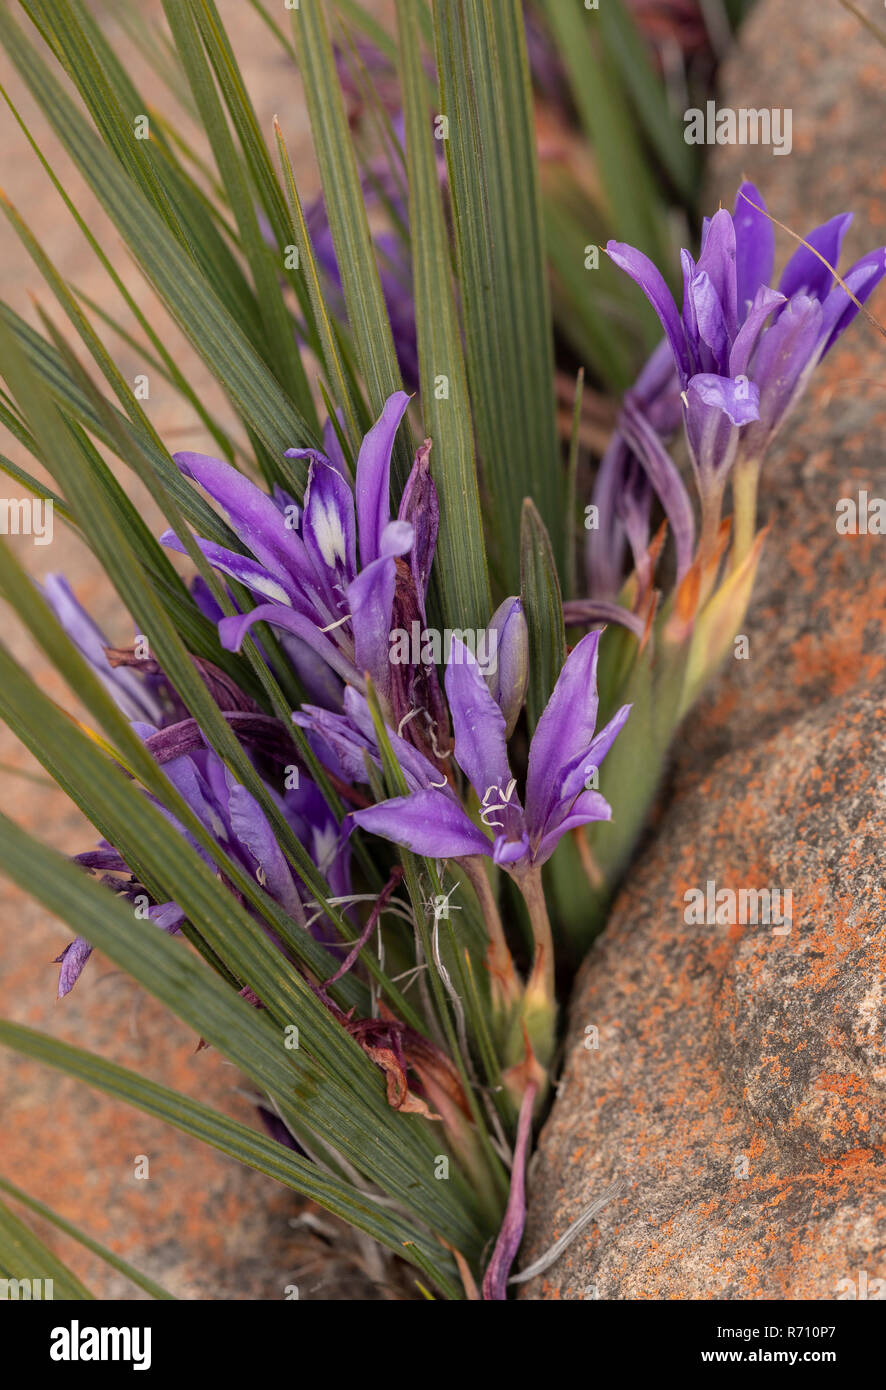 A Baboon flower, Babiana framesii growing in a rock crevice, in flower at Matjiesfontein, Nieuwoudtville, Western Cape, South Africa. Stock Photo